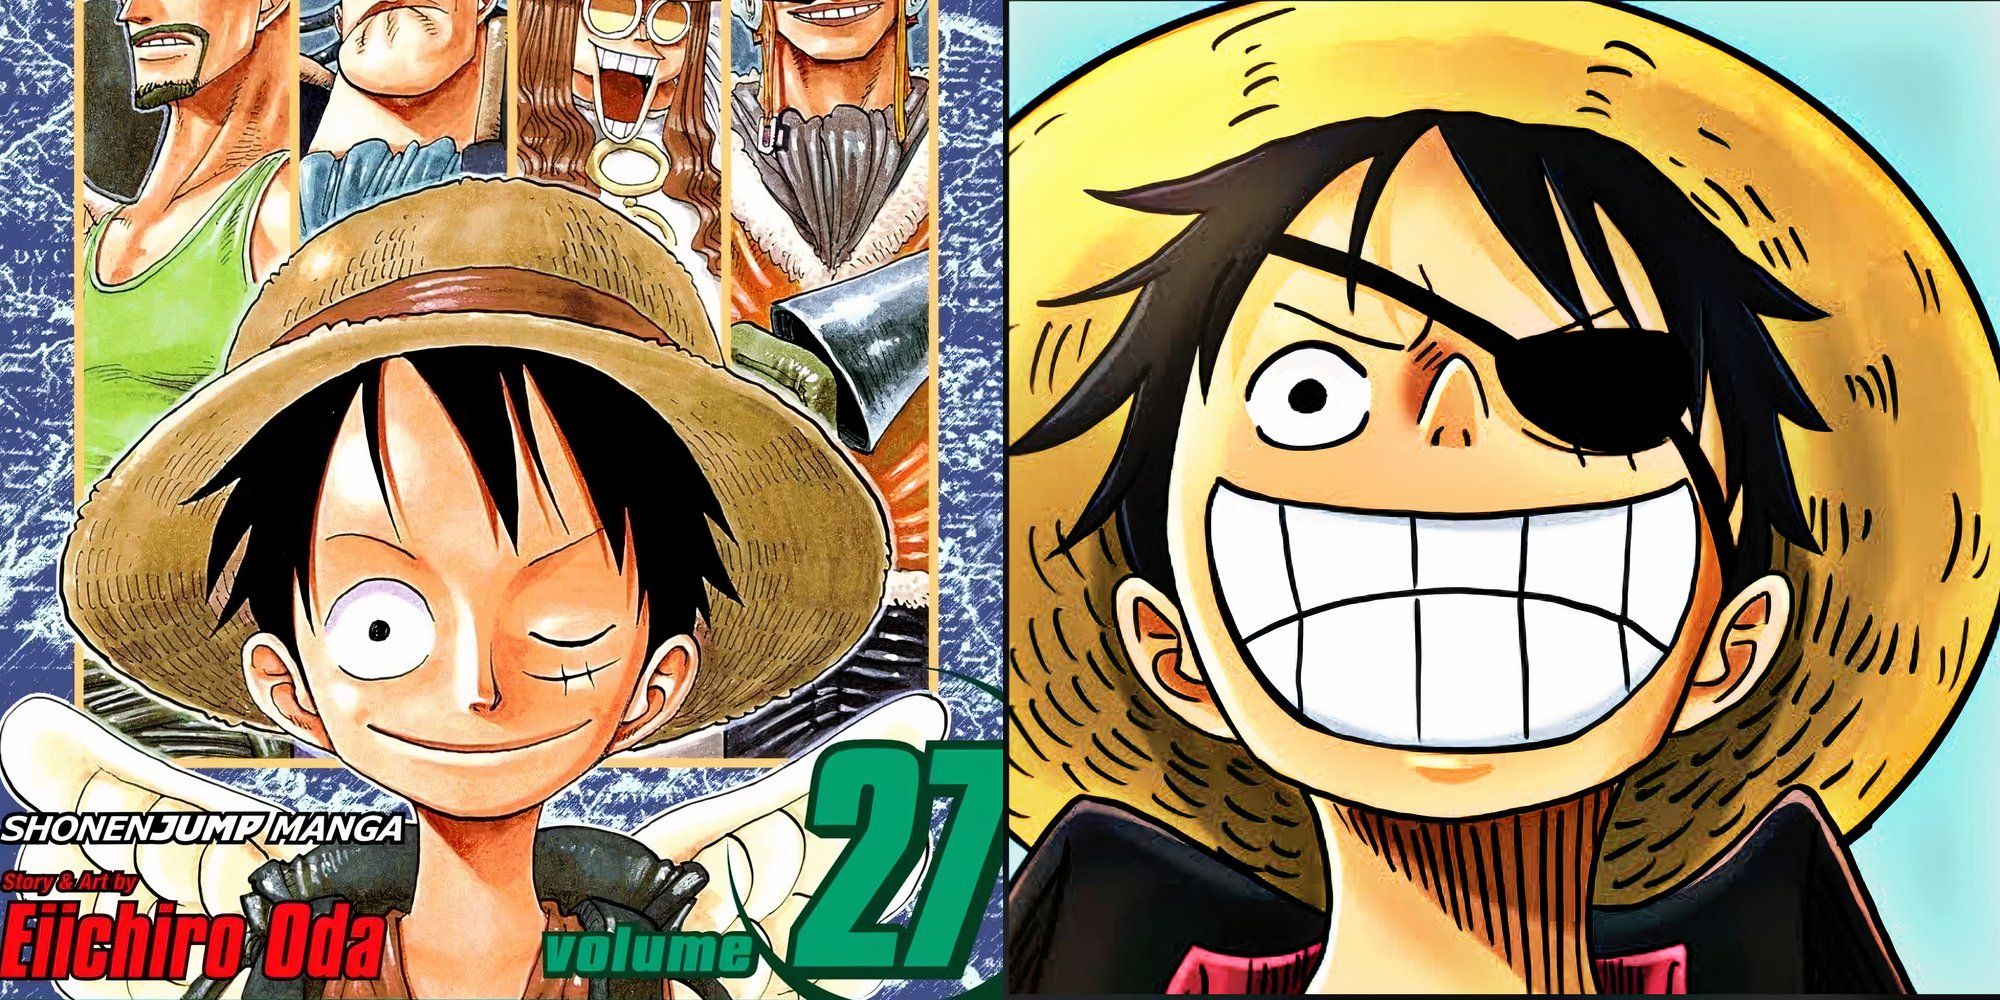 luffy winking on the cover of volume 27 of one piece and luffy with an eye patch